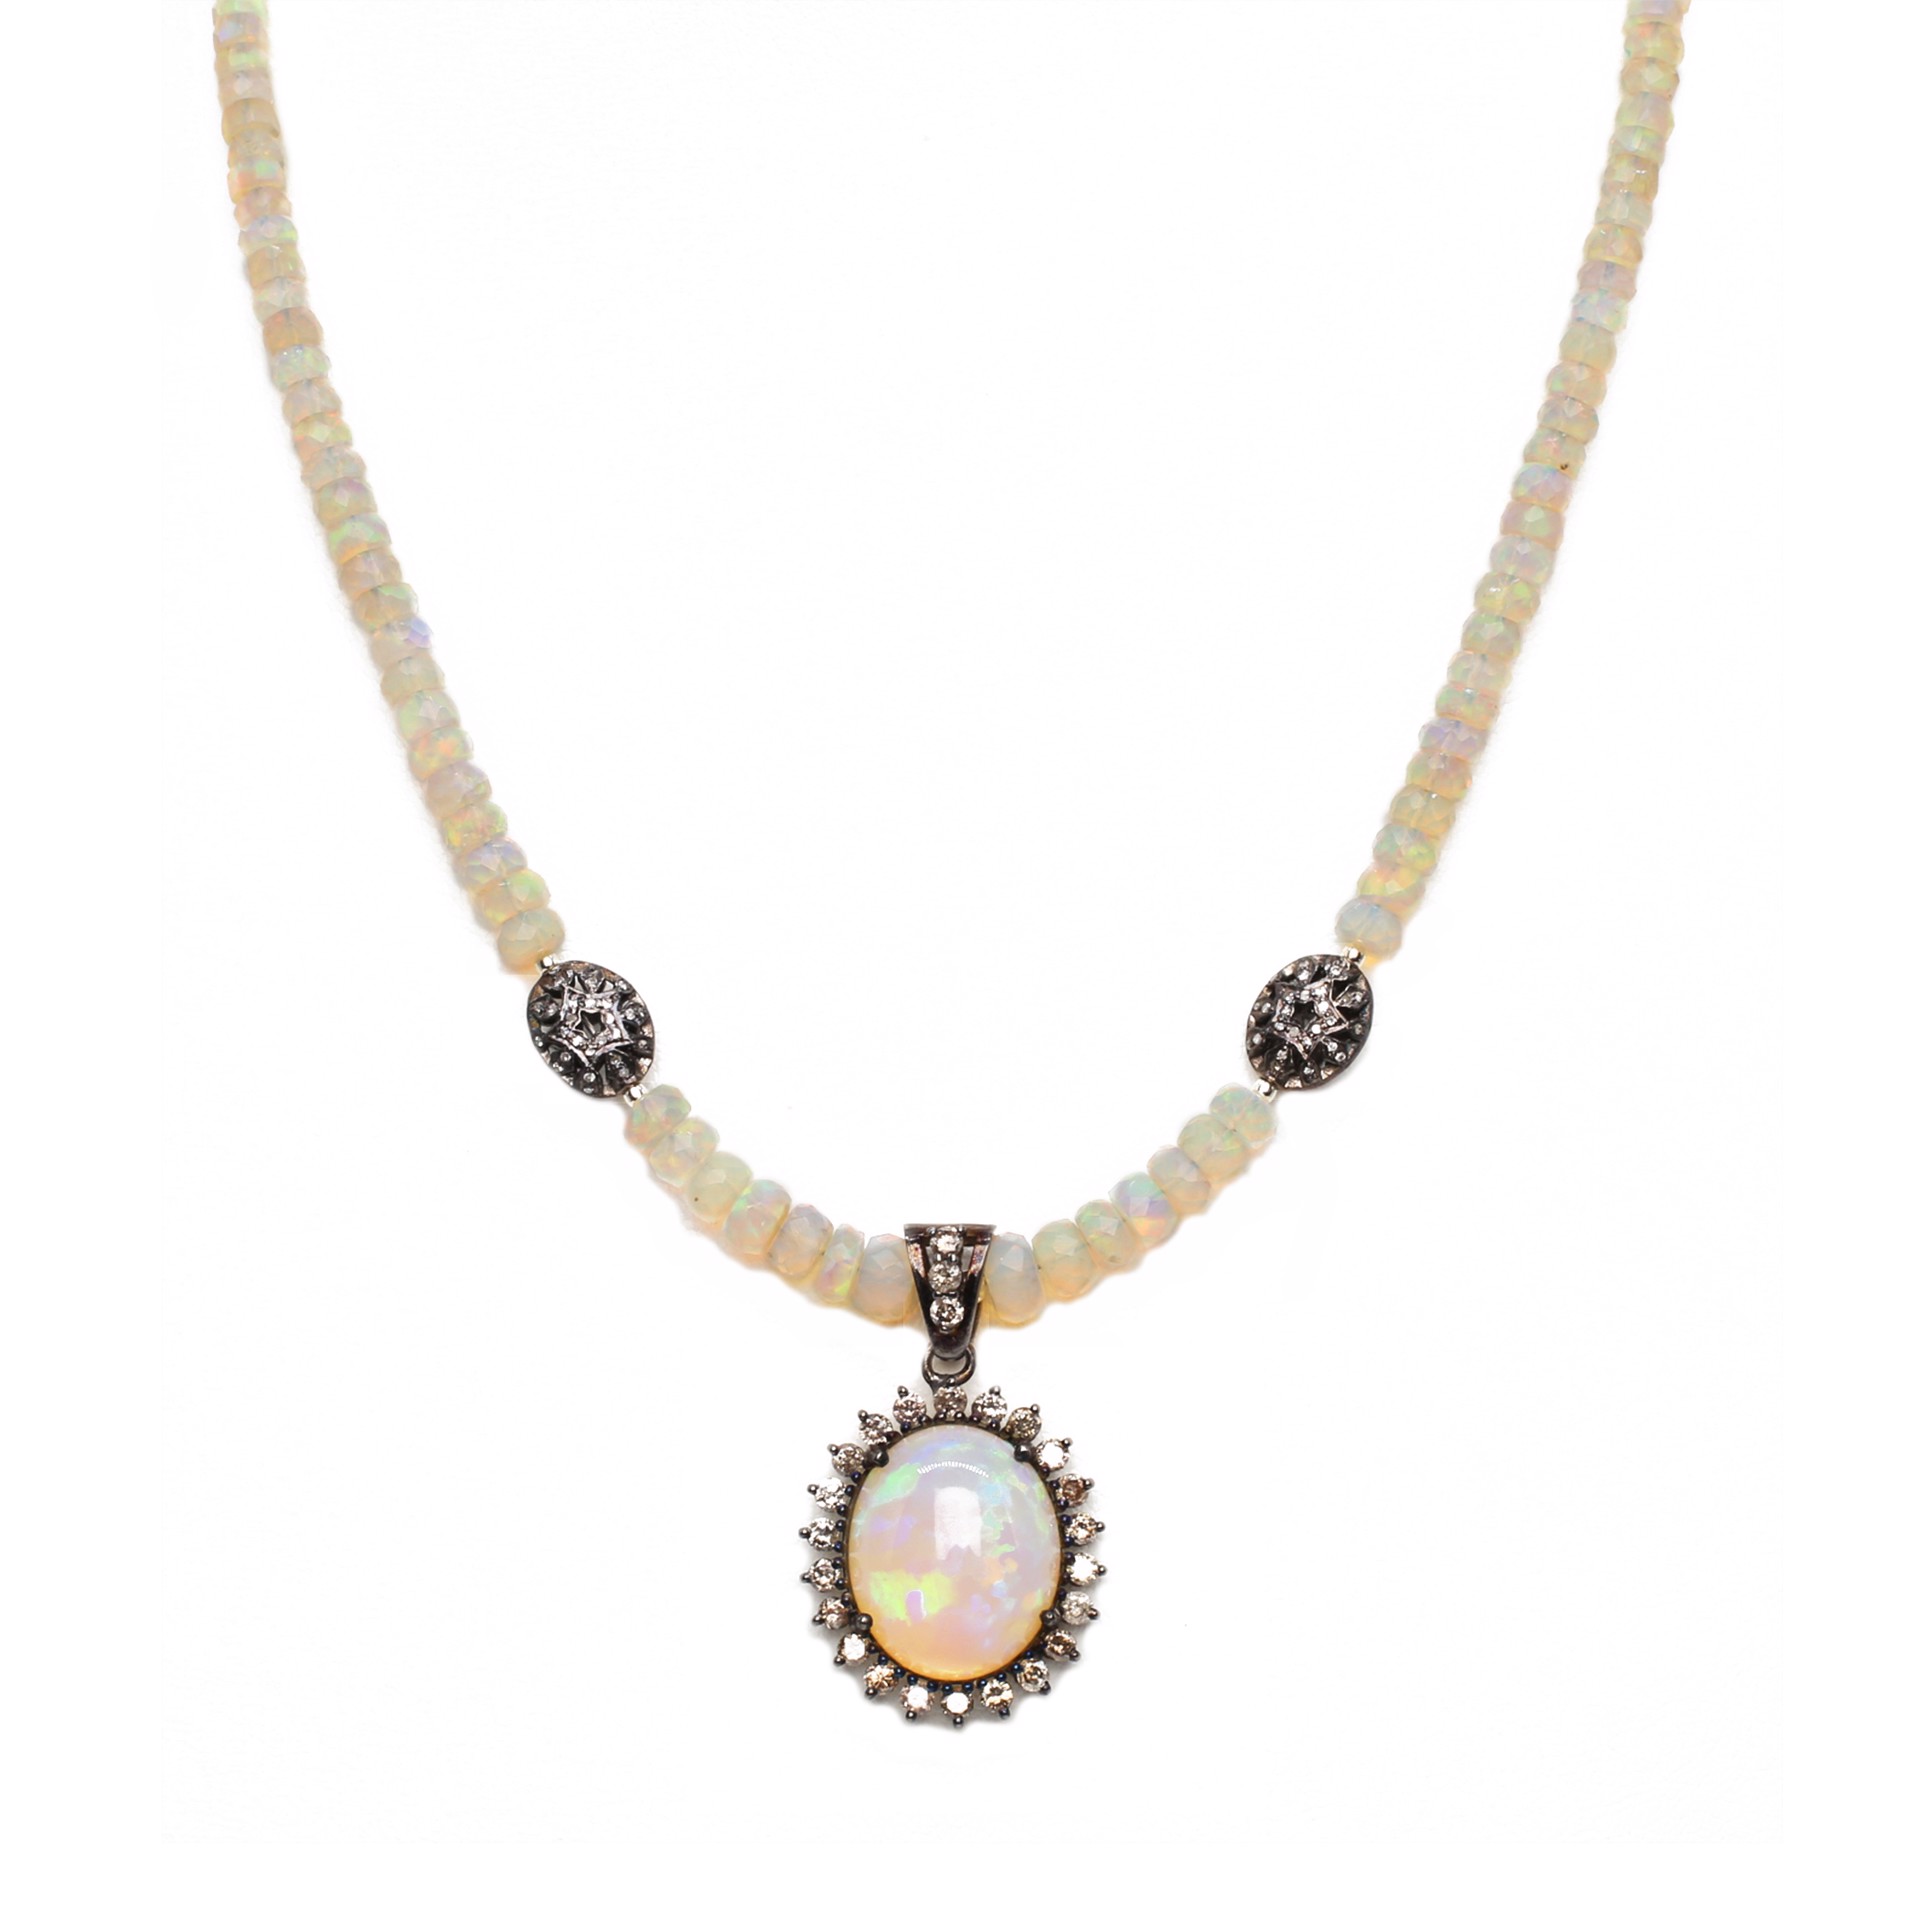 MLJ-3358-N- Opal and Diamond Pendant on an Opal Rondell Chain in Sterling Silver by Melinda Lawton Jewelry